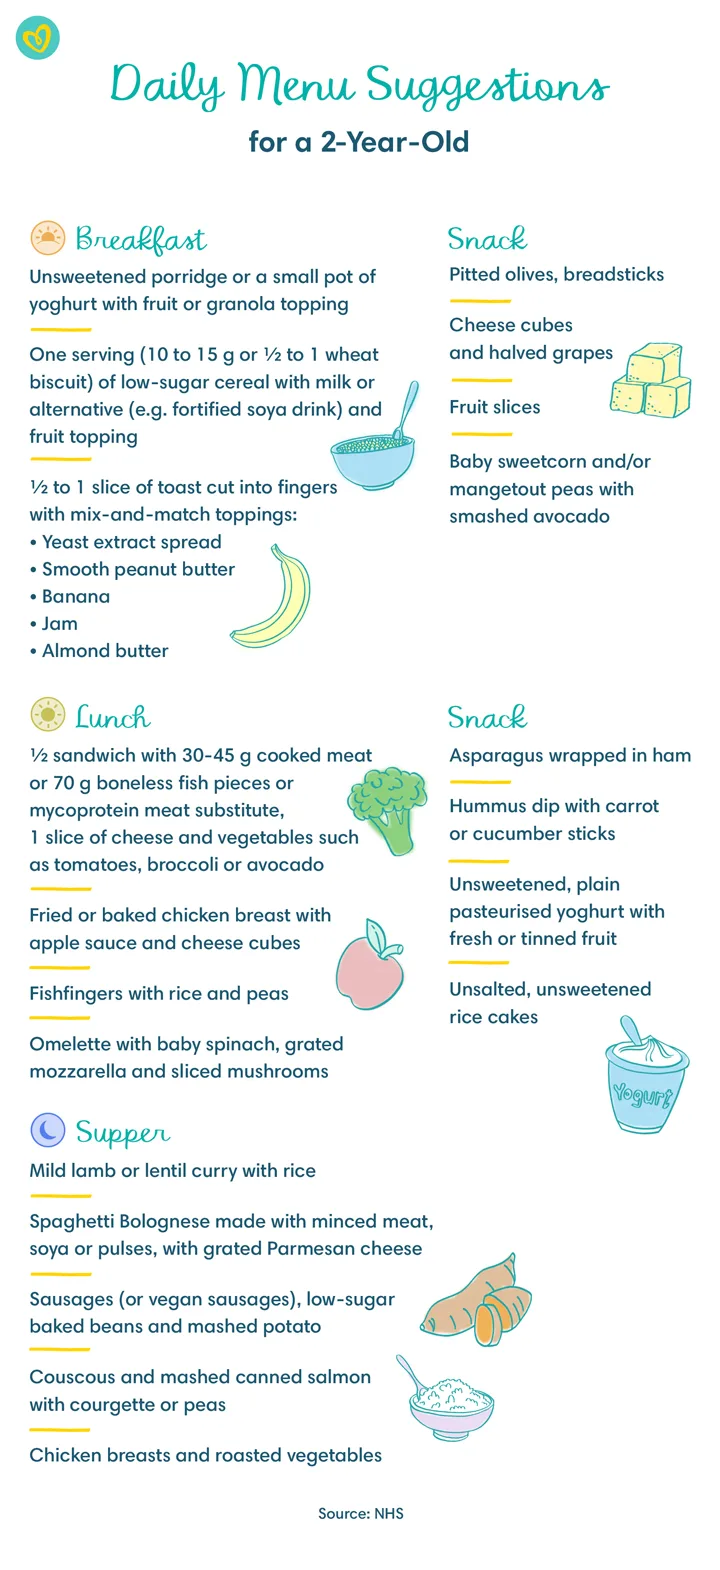 Daily Menu for a 2-Year-Old